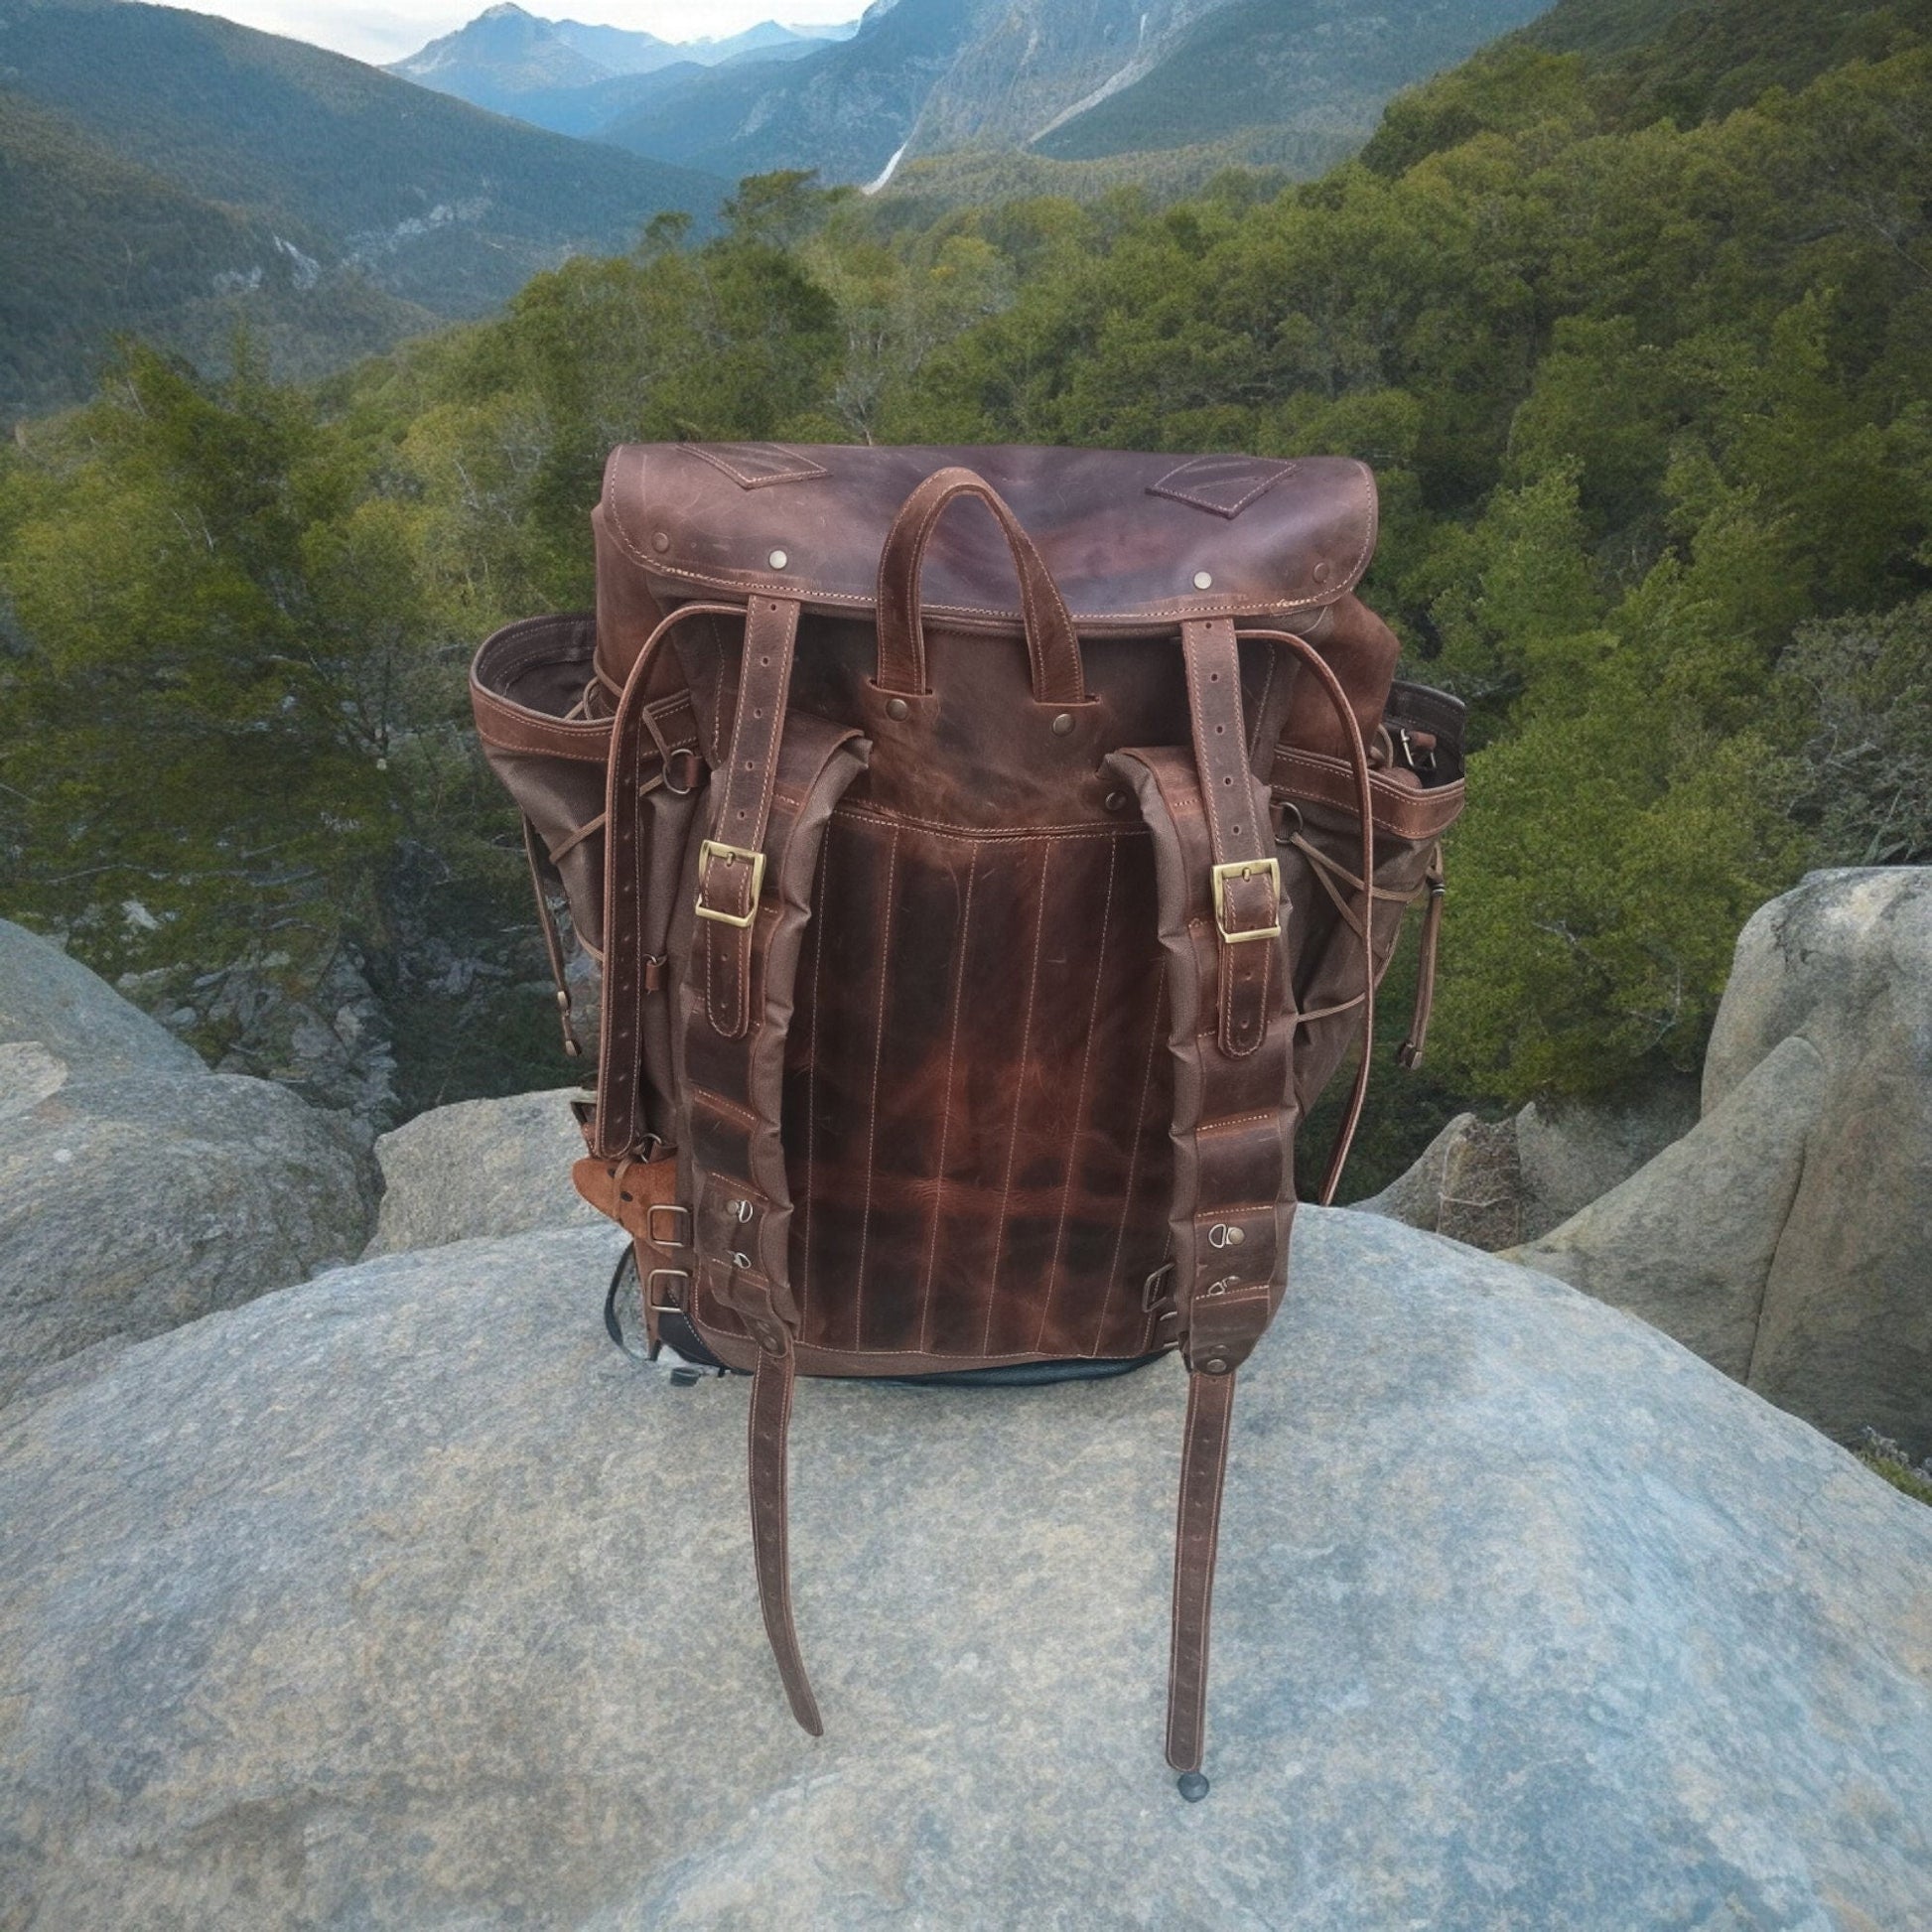 New | Handmade Waxed Canvas Backpack | 35L-45L | Leather Backpack | Daily Use | Bushcraft, Travel, Camping, Hunting, Fishing, Sports bag  99percenthandmade   